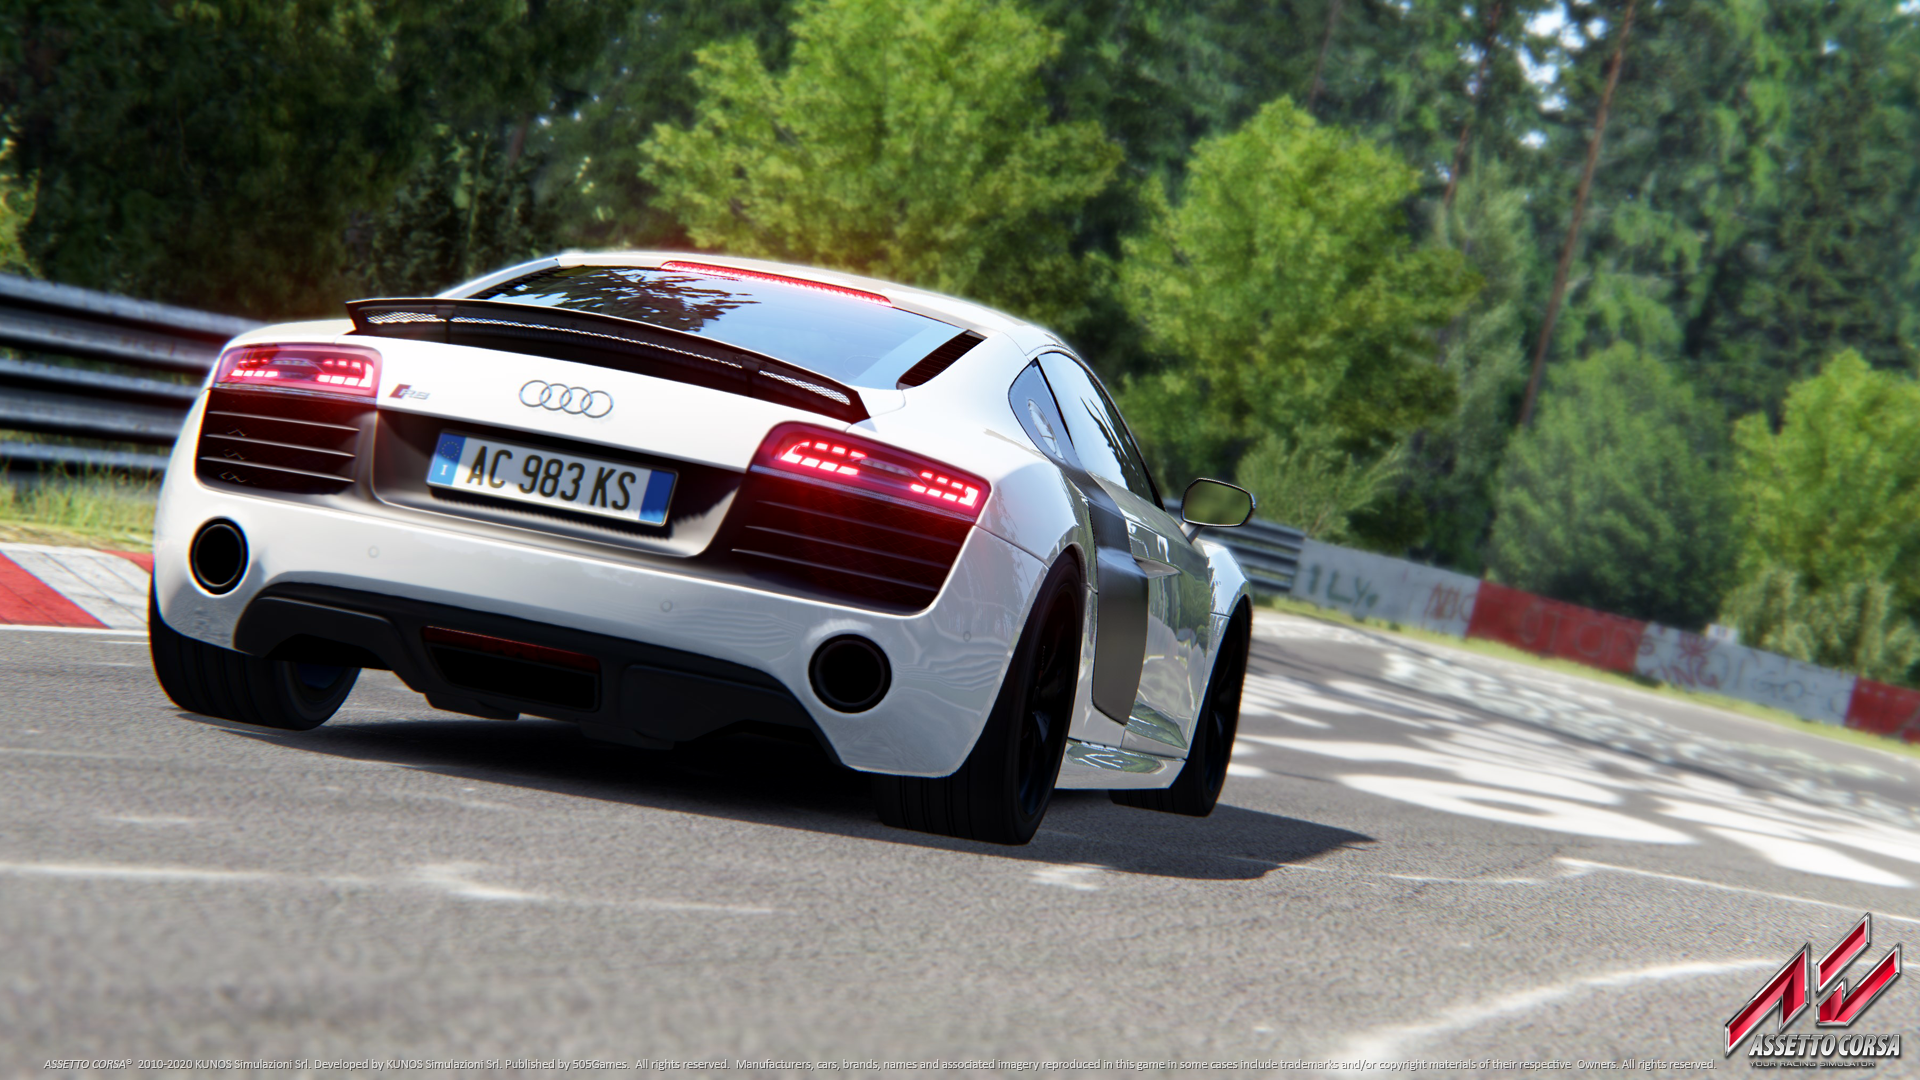 Image for Racing sim Assetto Corsa arrives on PS4 and Xbox One in April